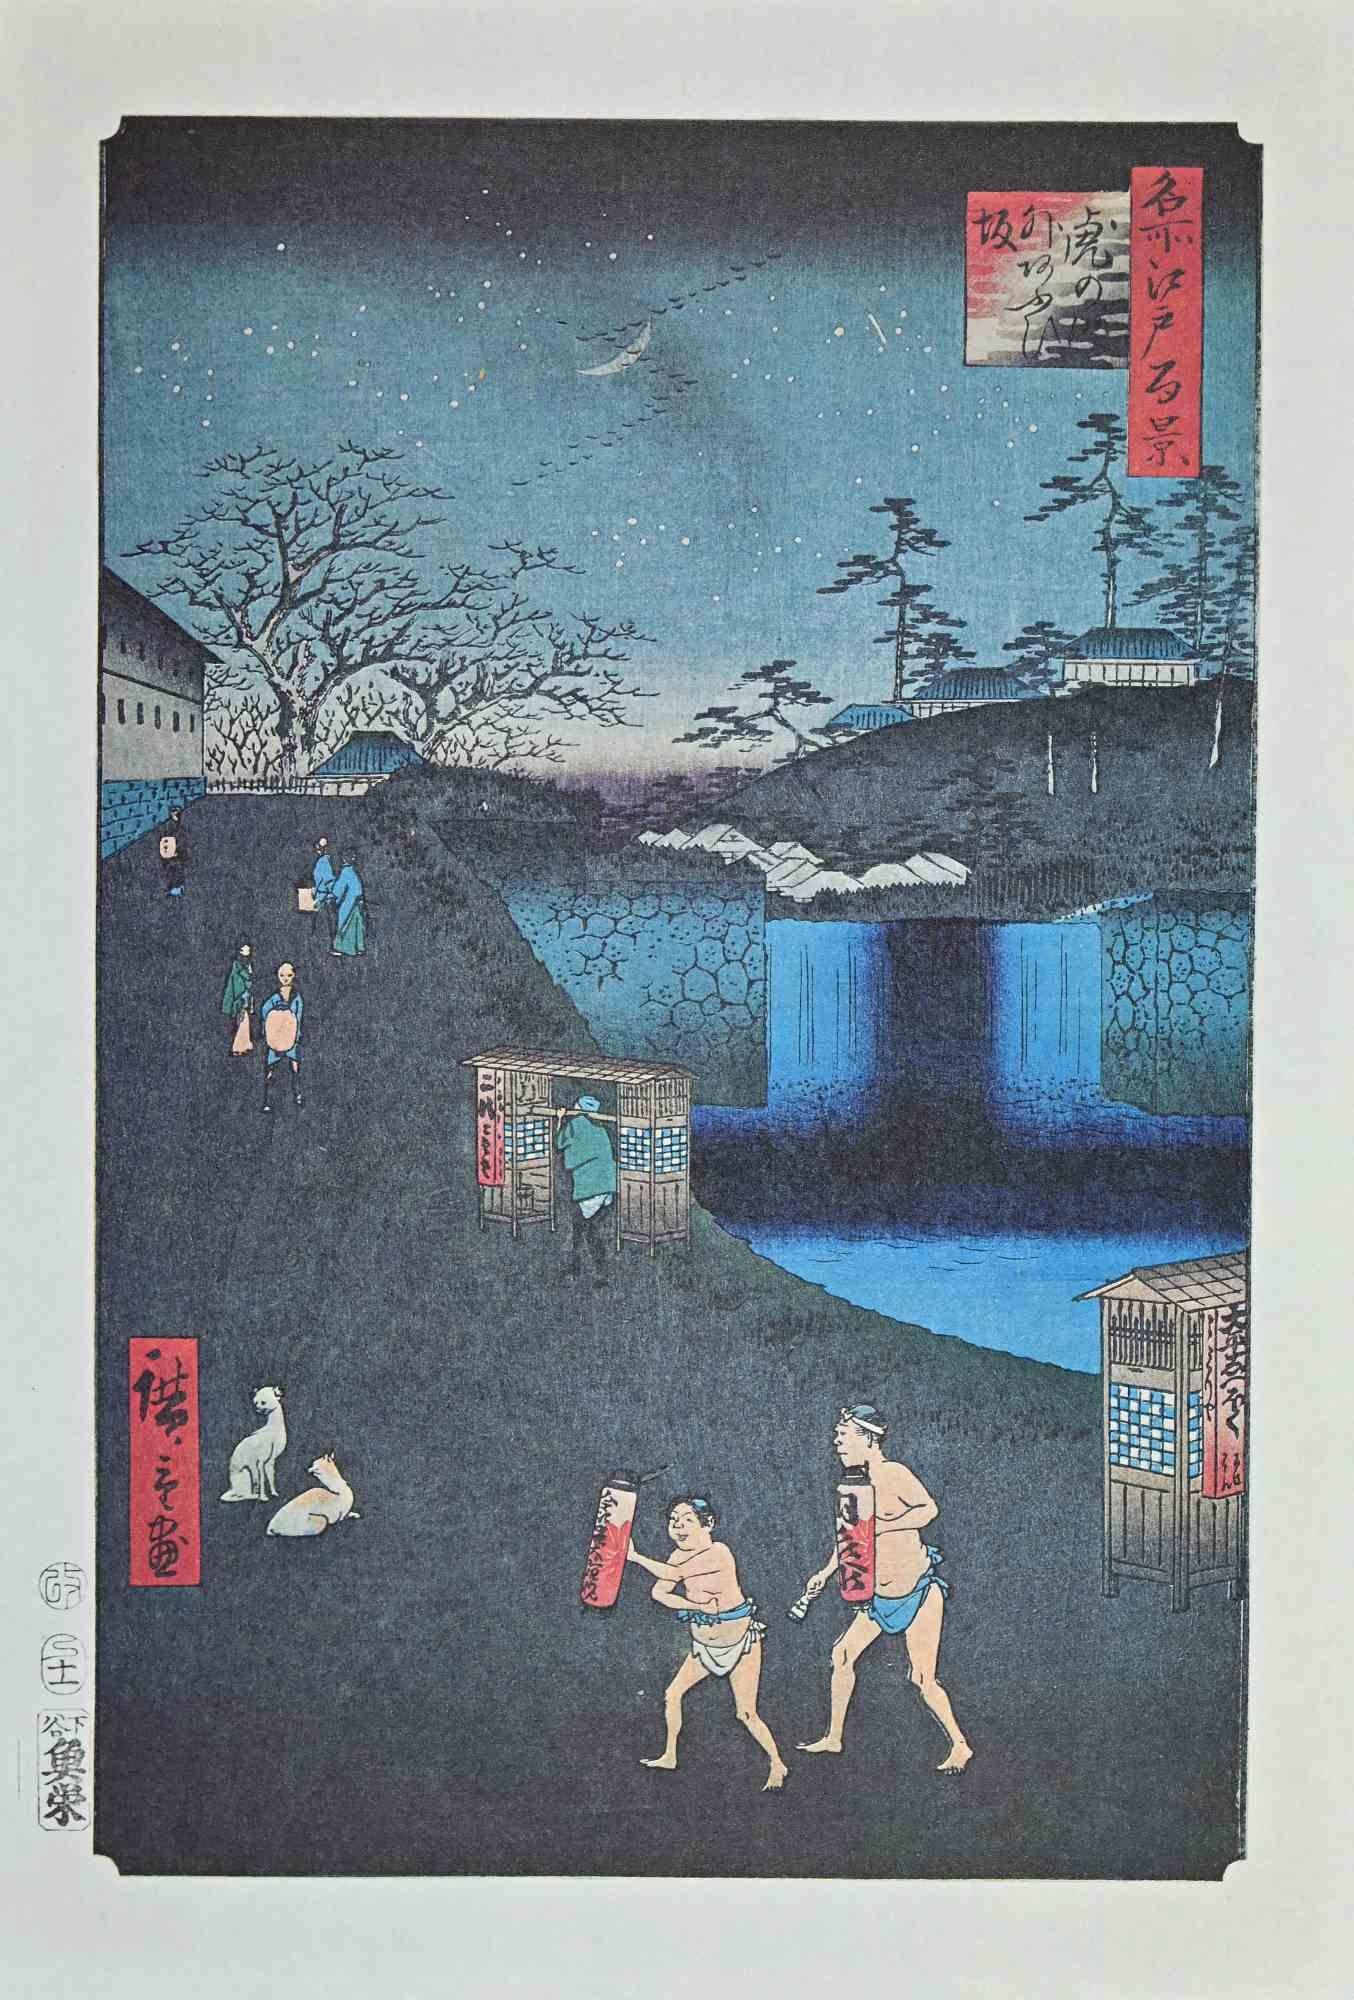 The Sunrise by River is a modern artwork realized in the Mid-20th Century.

Mixed colored lithograph after a woodcut realized by the great Japanese artist Utagawa Hiroshige in the 19th century.

Very Good conditions.

Collect an oriental